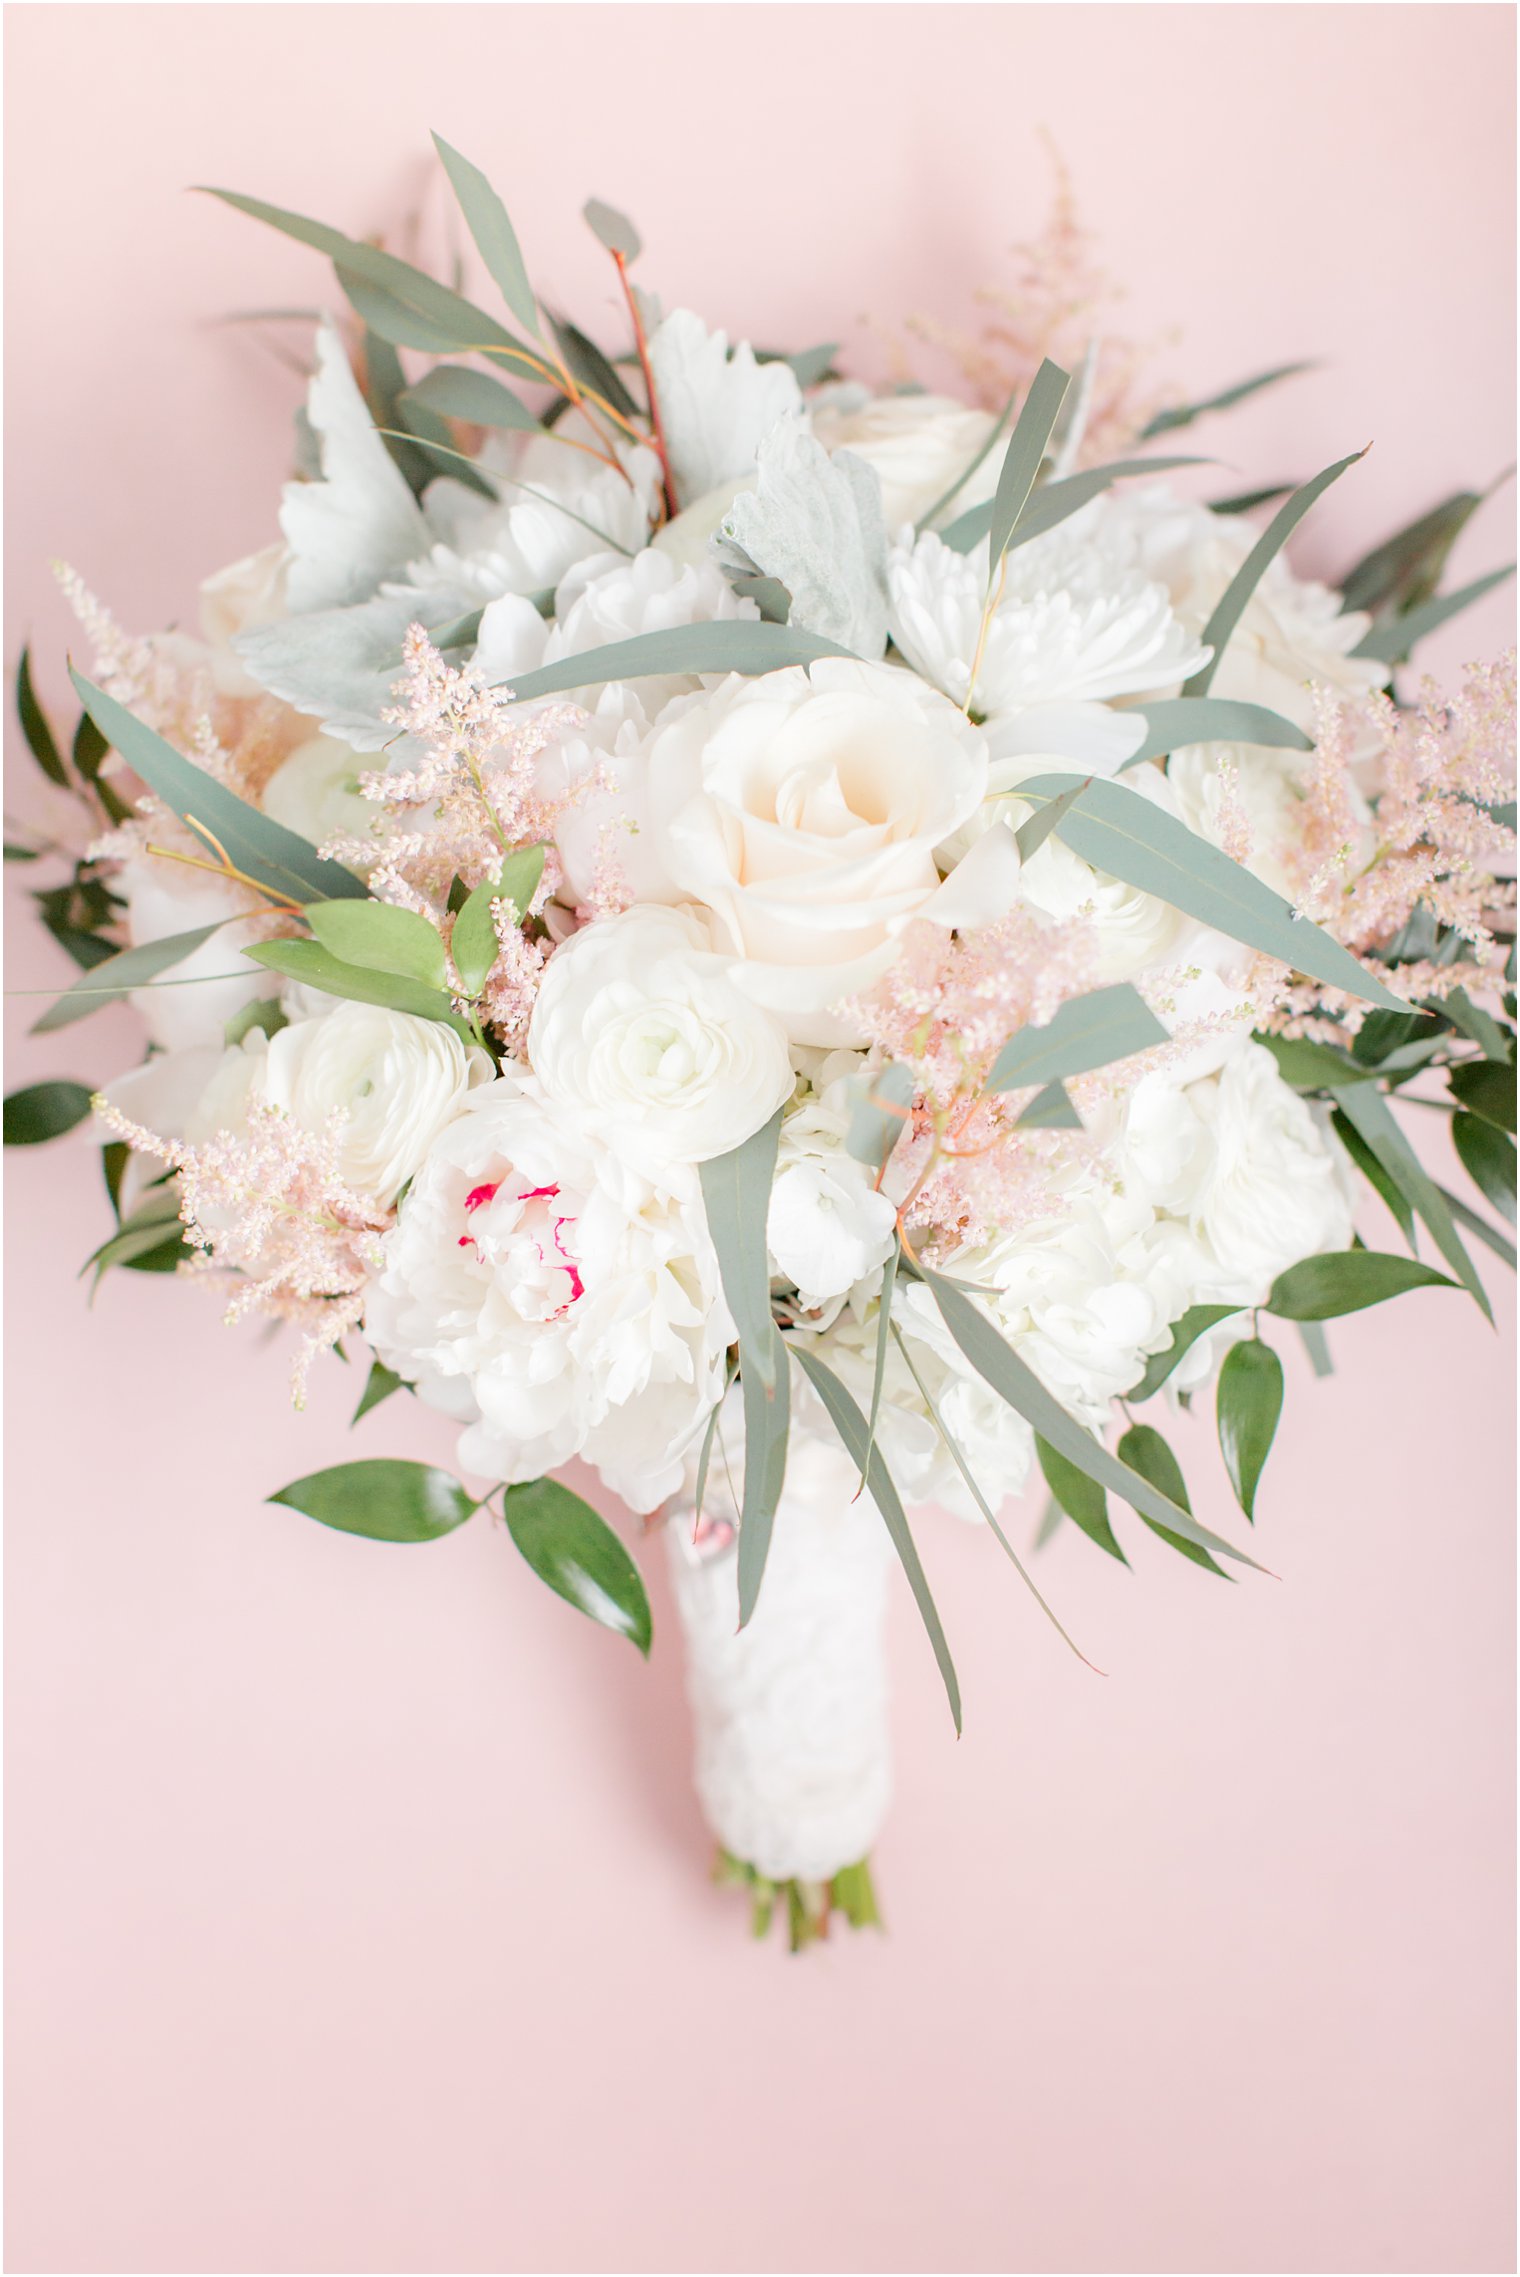 wedding bouquet by Dalsimer Spitz and Peck